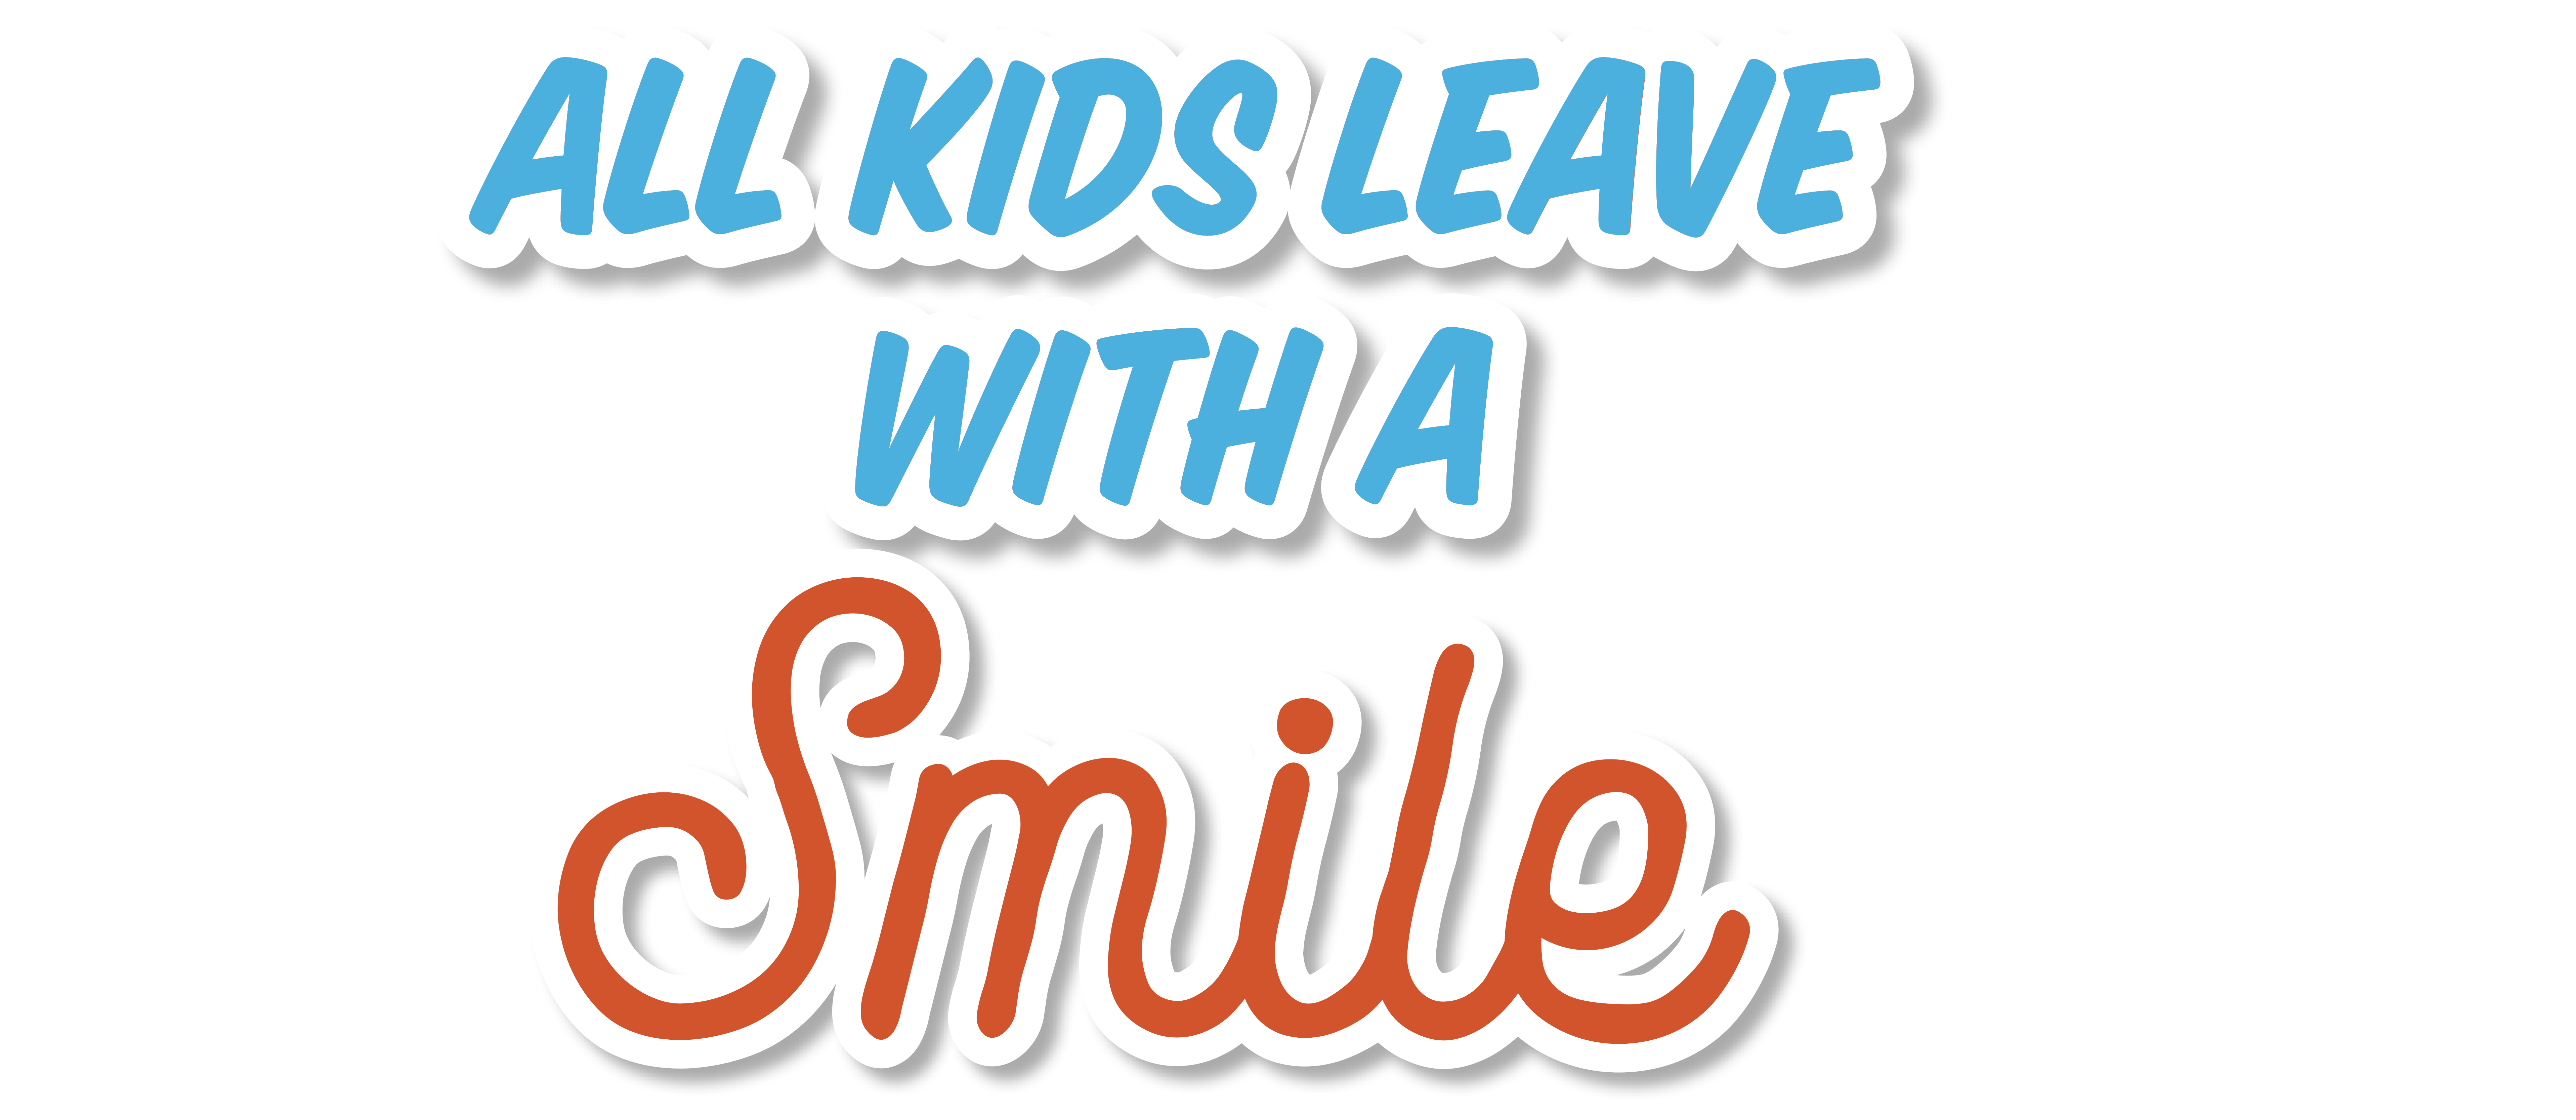 All Kids Leave with a Smile!